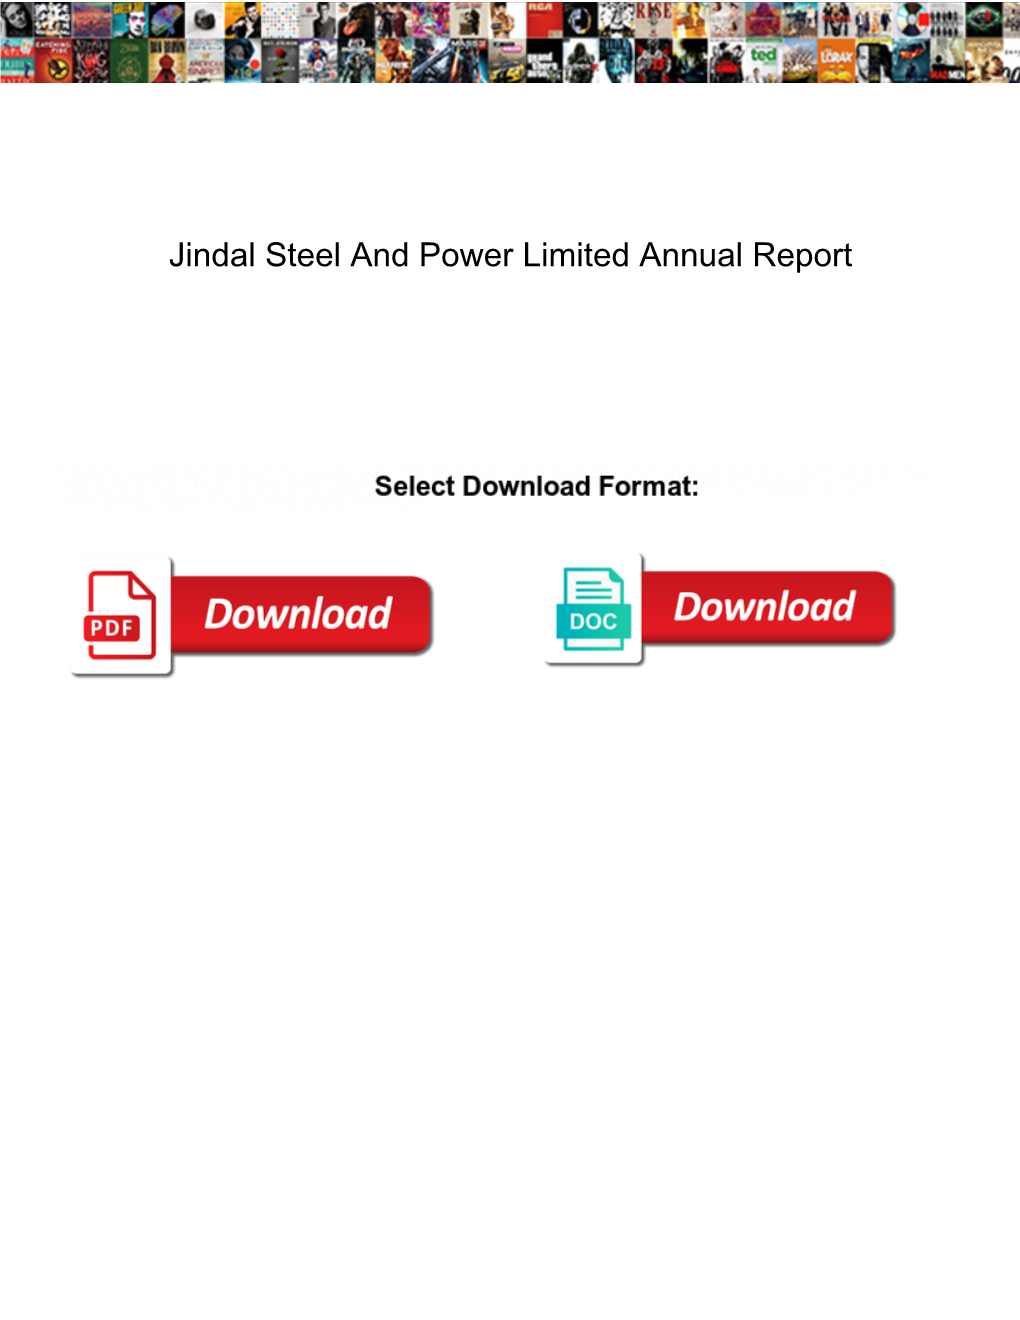 Jindal Steel and Power Limited Annual Report